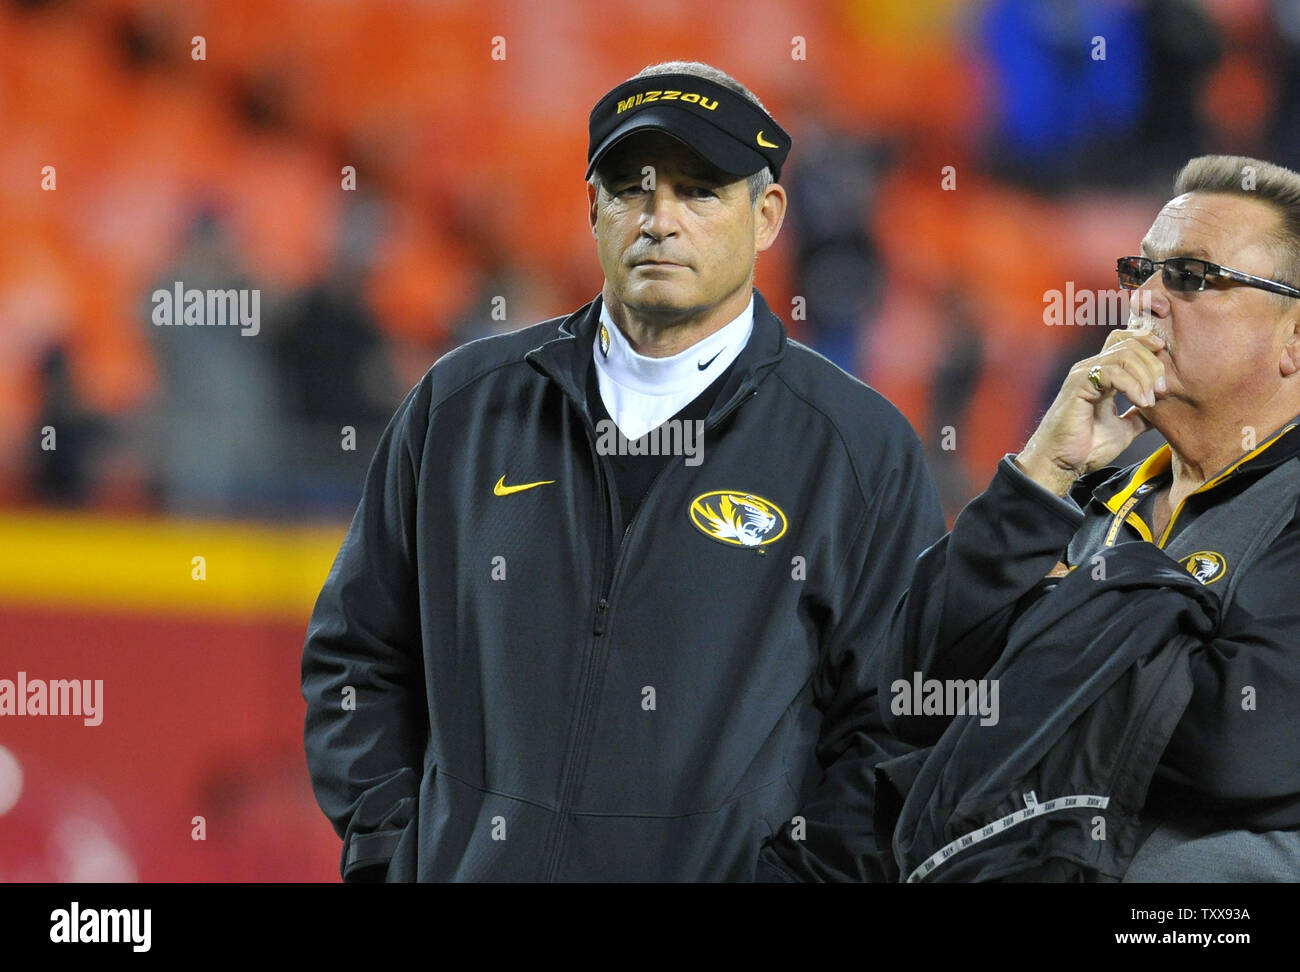 University Of Missouris Head Football Coach Gary Pinkel Watches His Team Practice Before A Game 